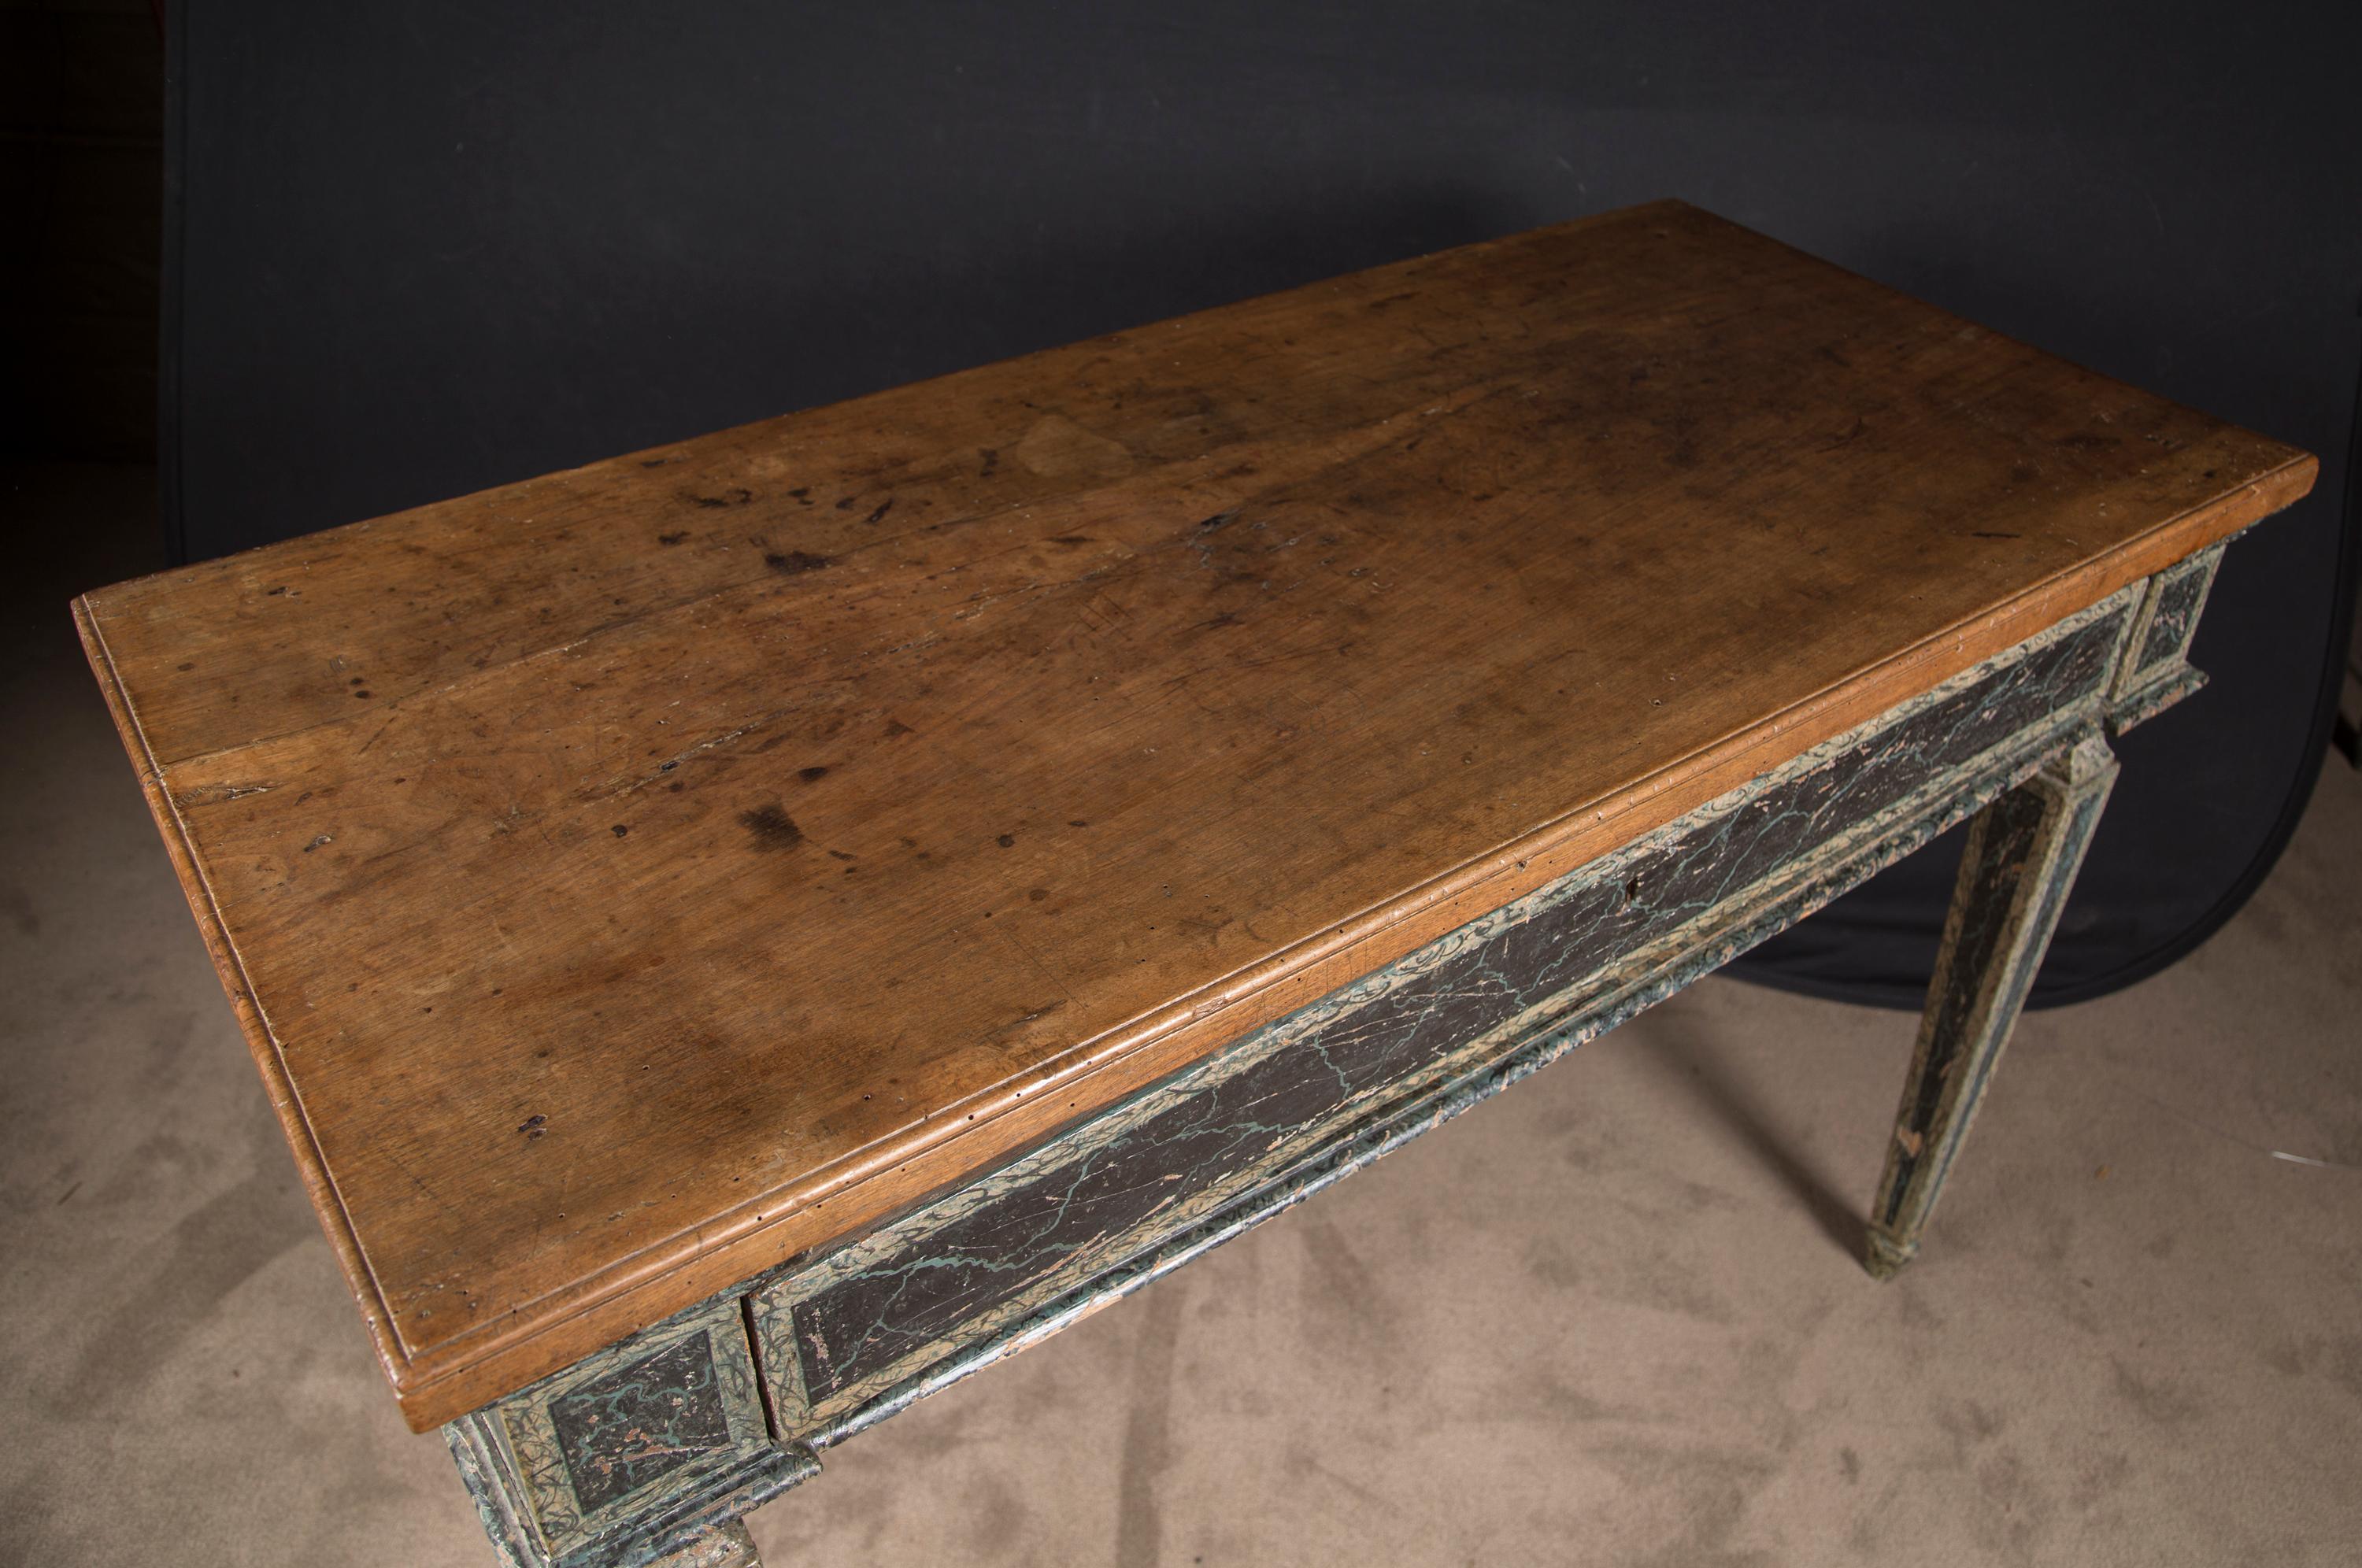 Rare Pair of Hand Painted 18th Century Louis XVI Consoles with Walnut Top In Good Condition For Sale In New Orleans, LA